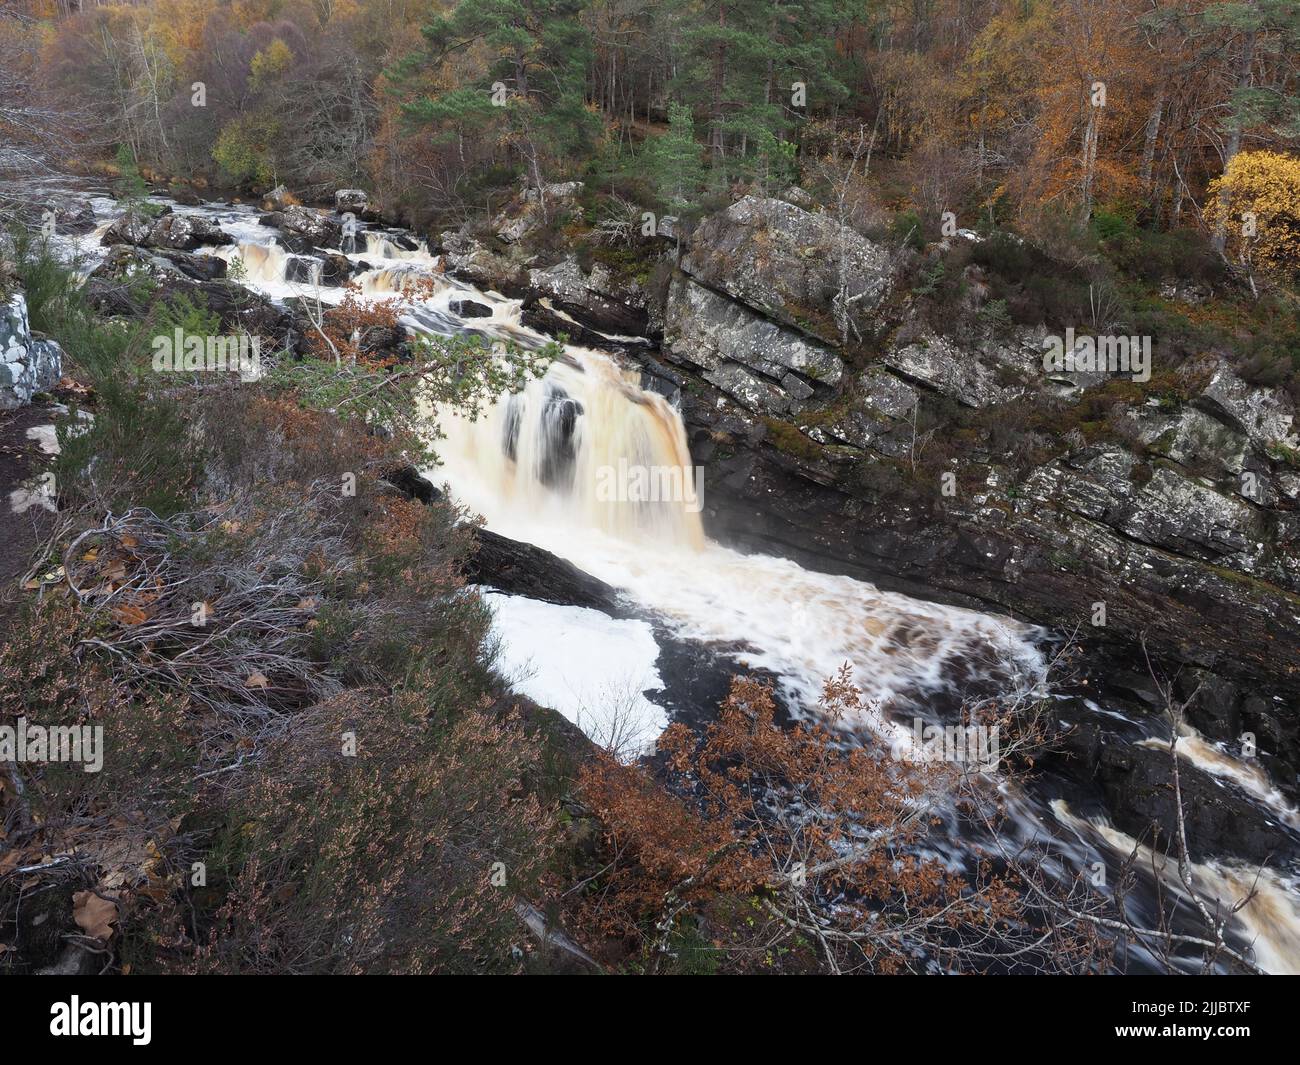 A late autumn day at Rogie Falls, on the Black Water river, near Strathpeffer. Trees in autumnal colours, & rocks surrounding the cascades. Stock Photo